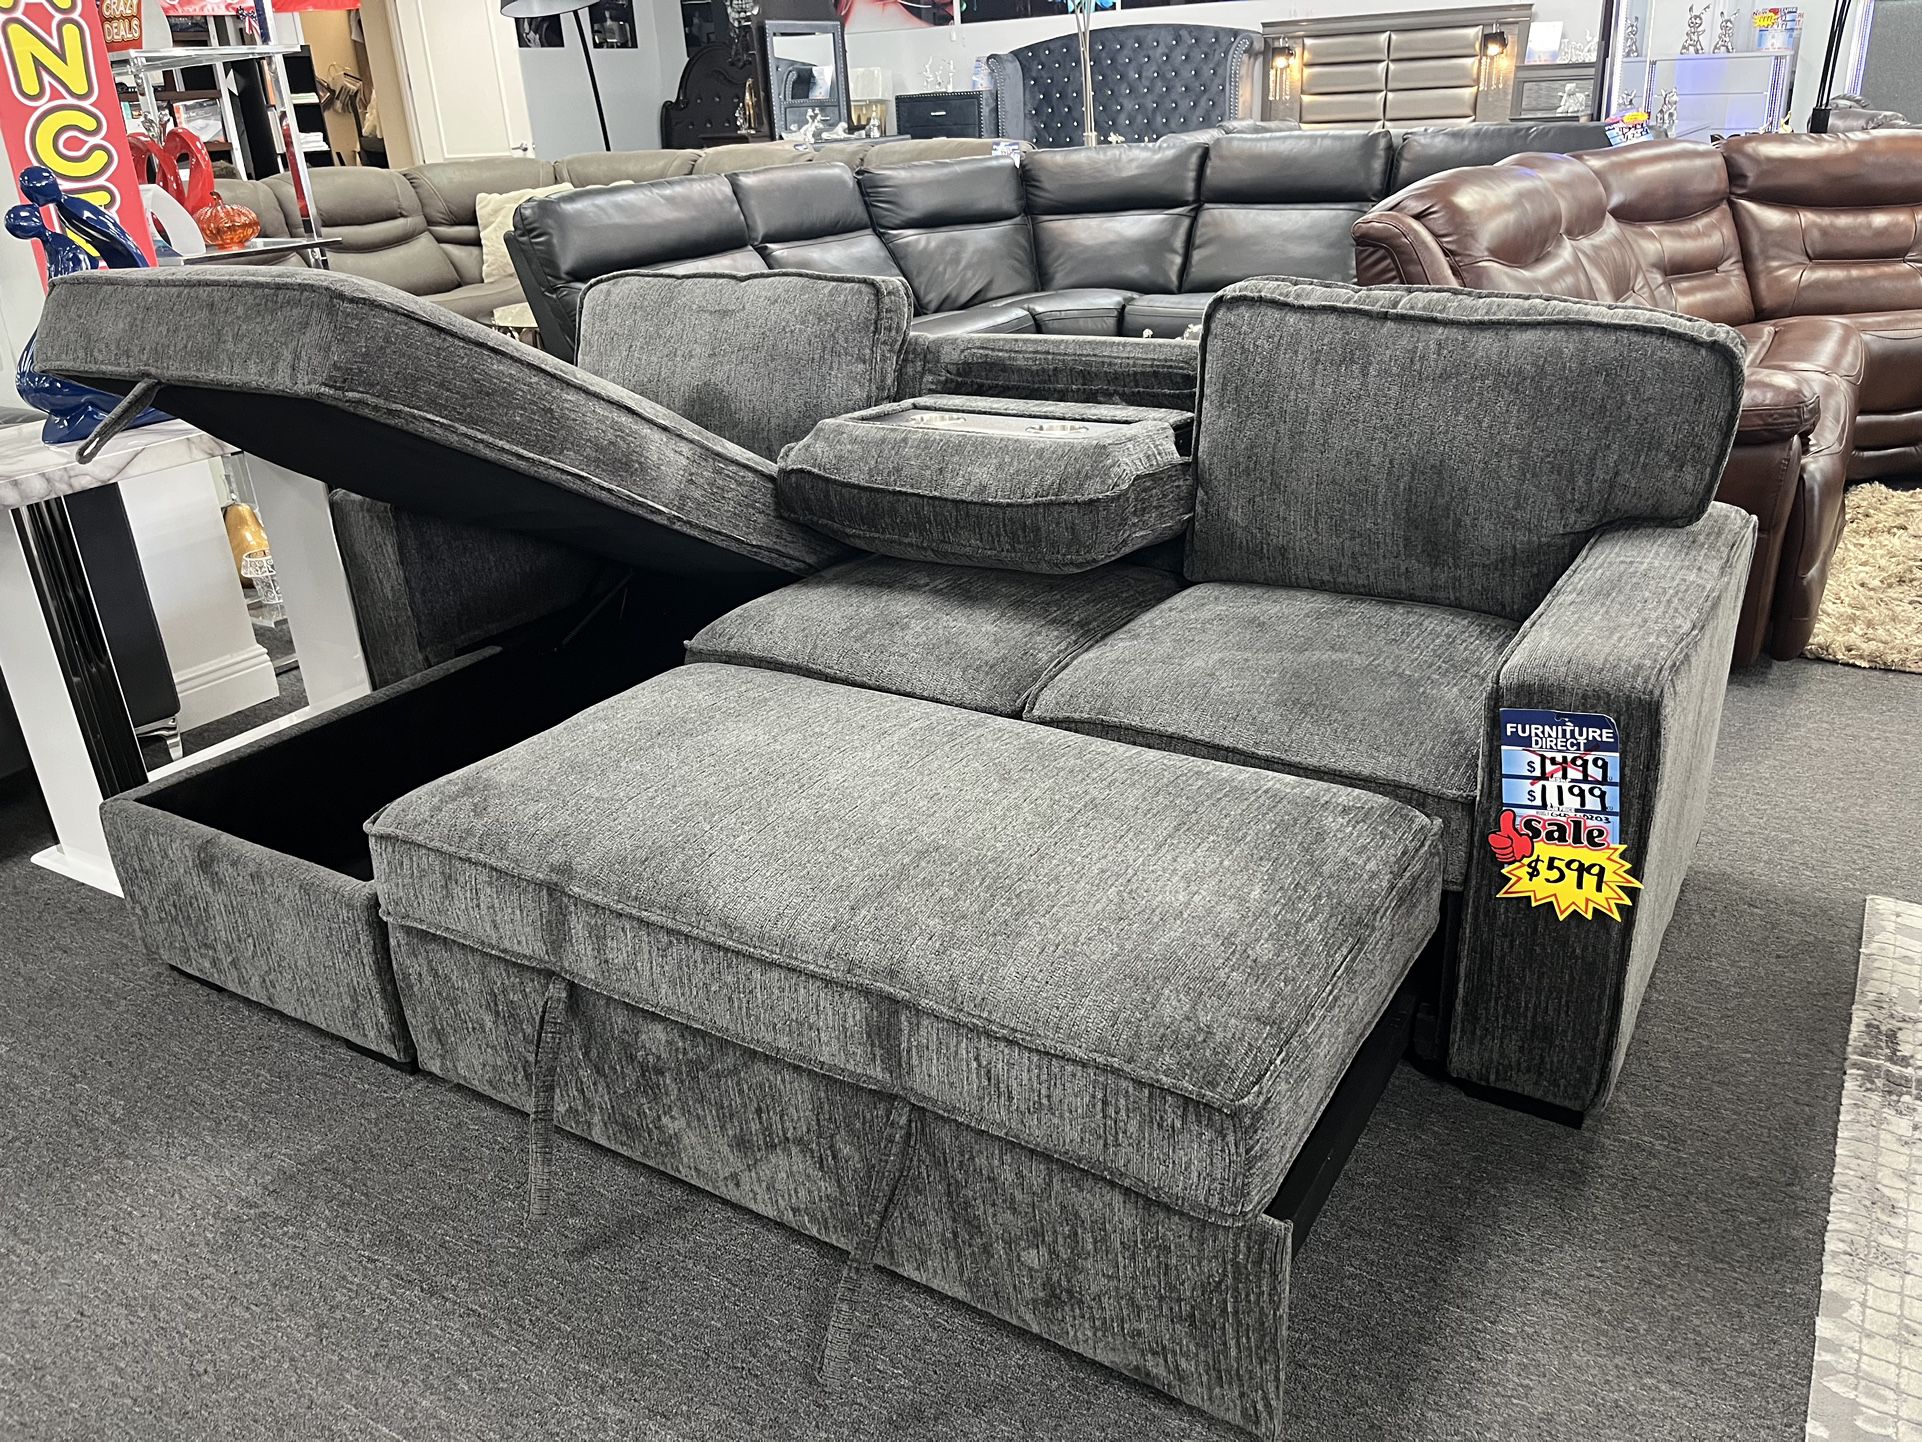 🐣🐣 Easter Final Sale On Sleeper Sofa With USB, Chaise Lounge & Drop Down Cup Holder !! $599 🐣🐣